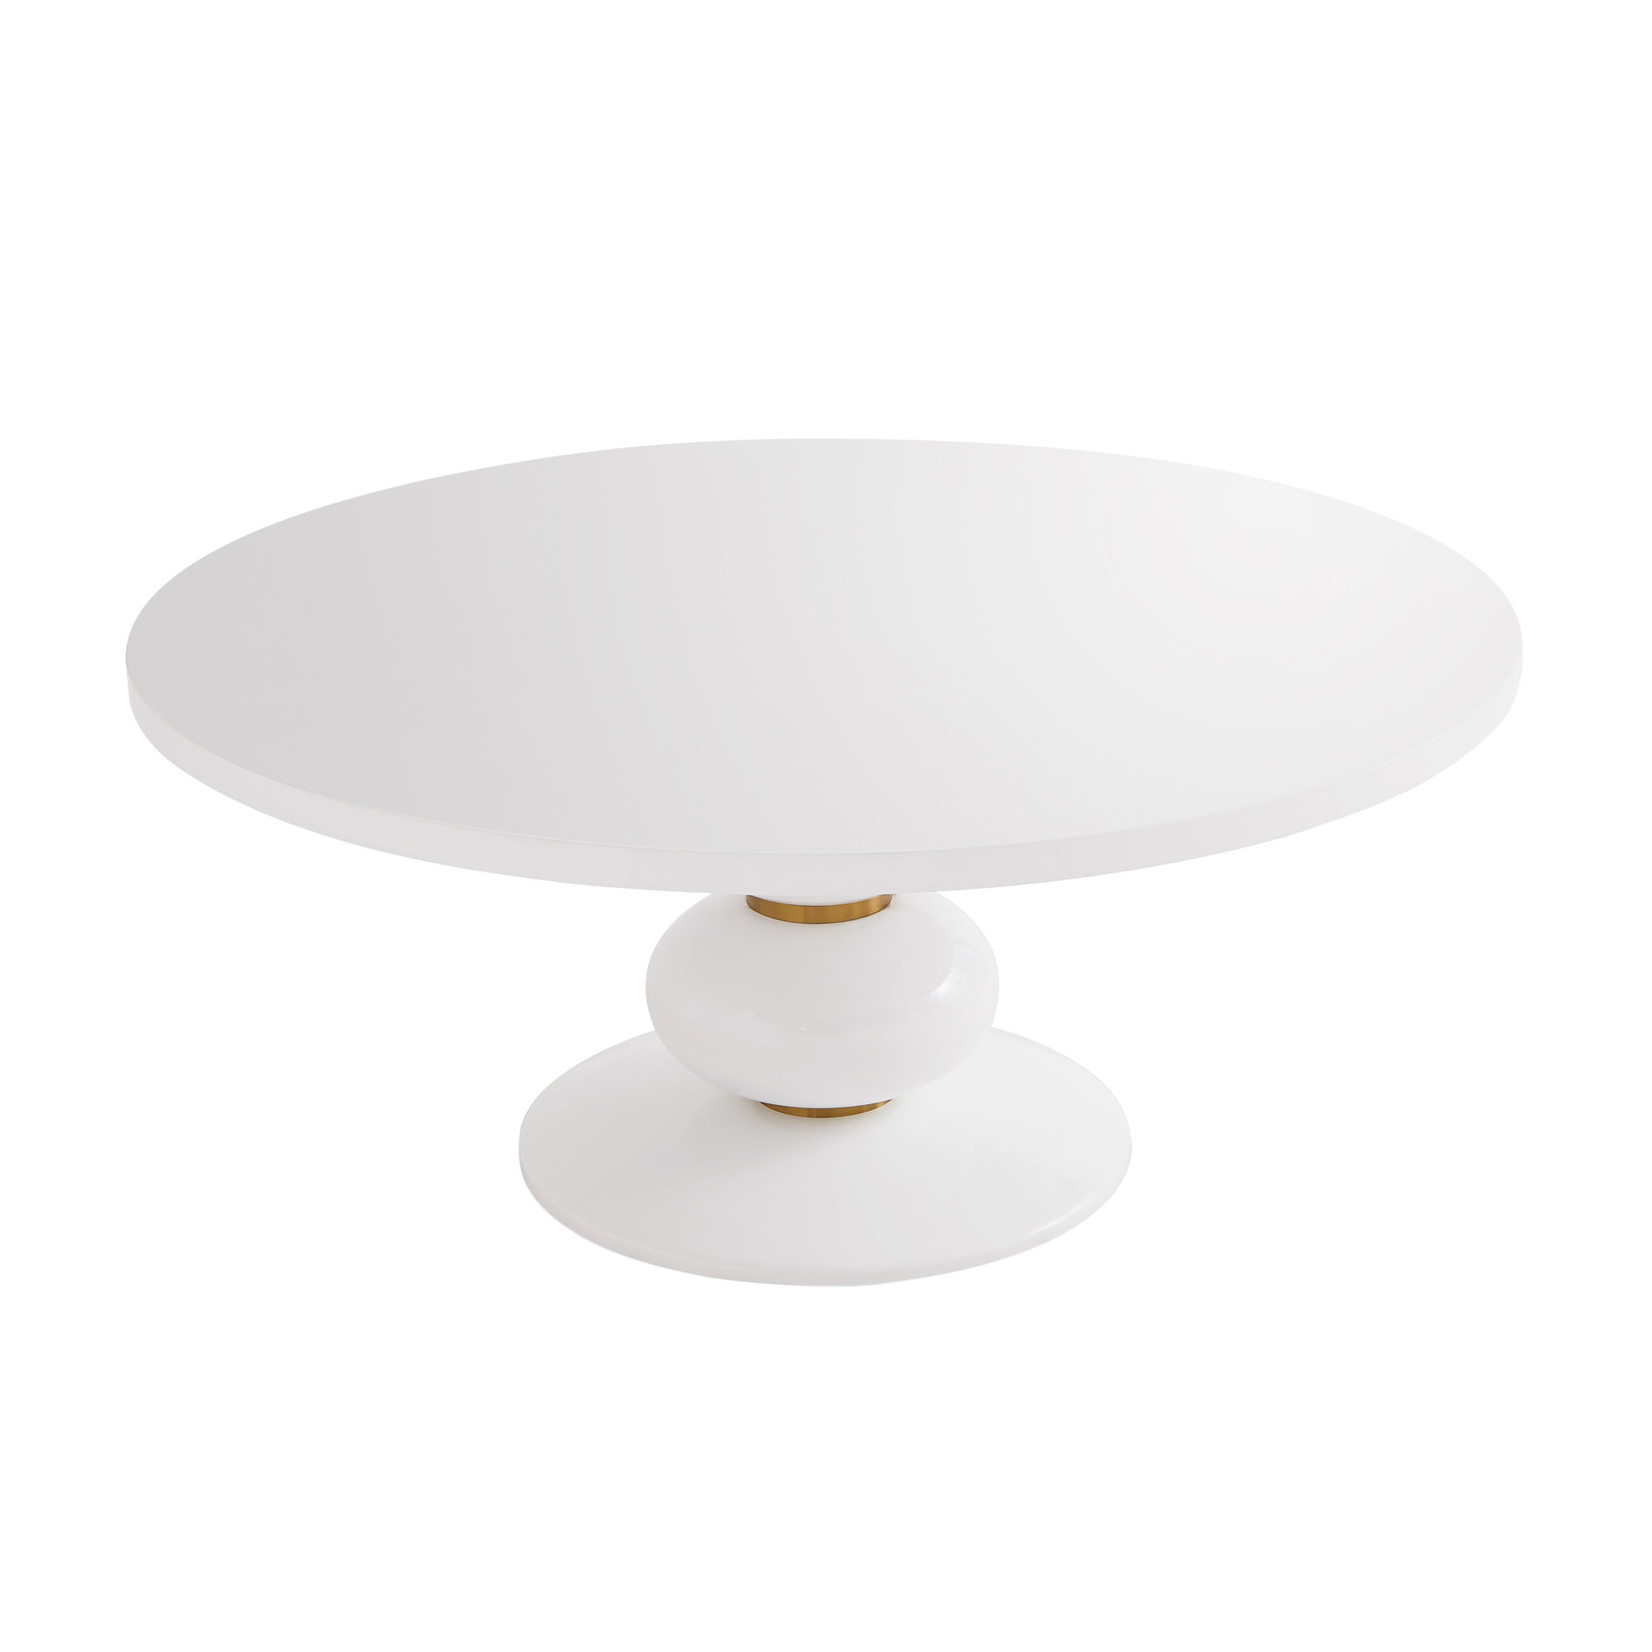 Tov ANNA 72" ROUND DINING TABLE